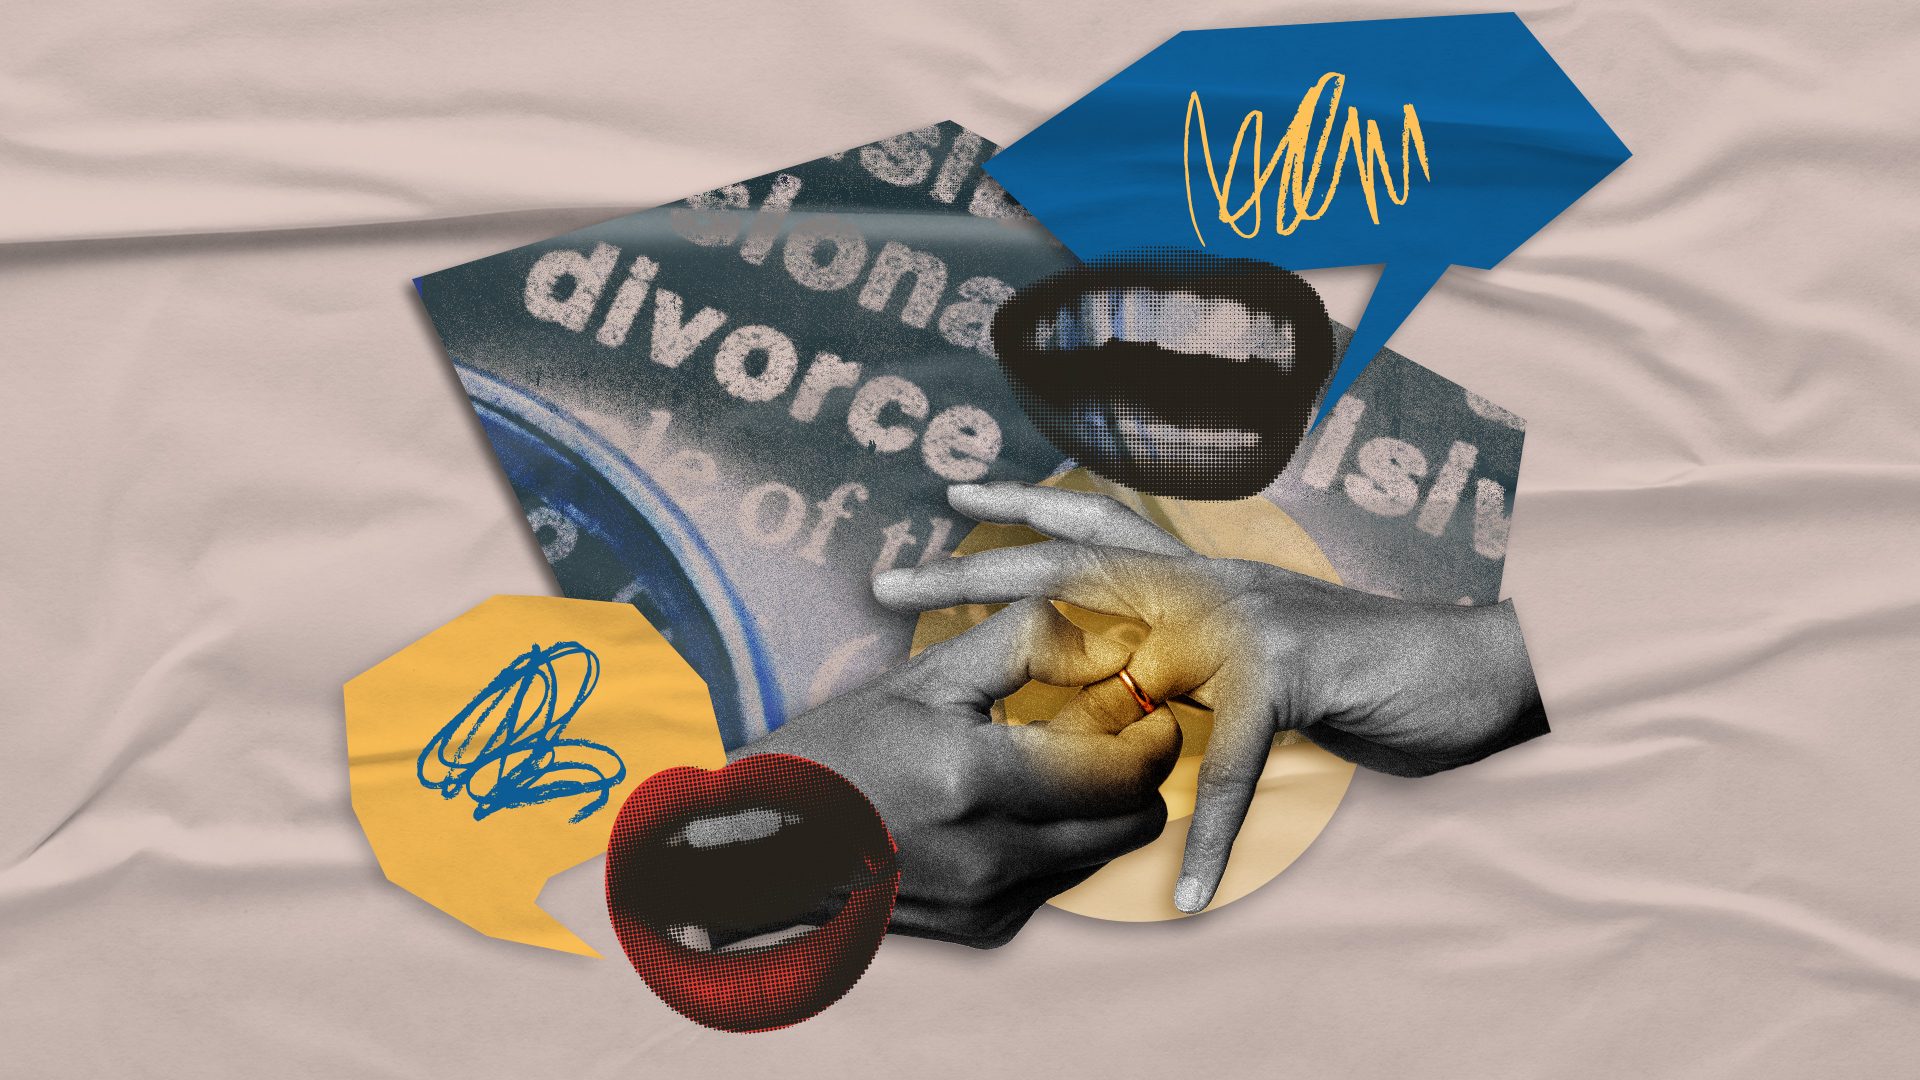 [Judgment Call] That messy conversation about divorce